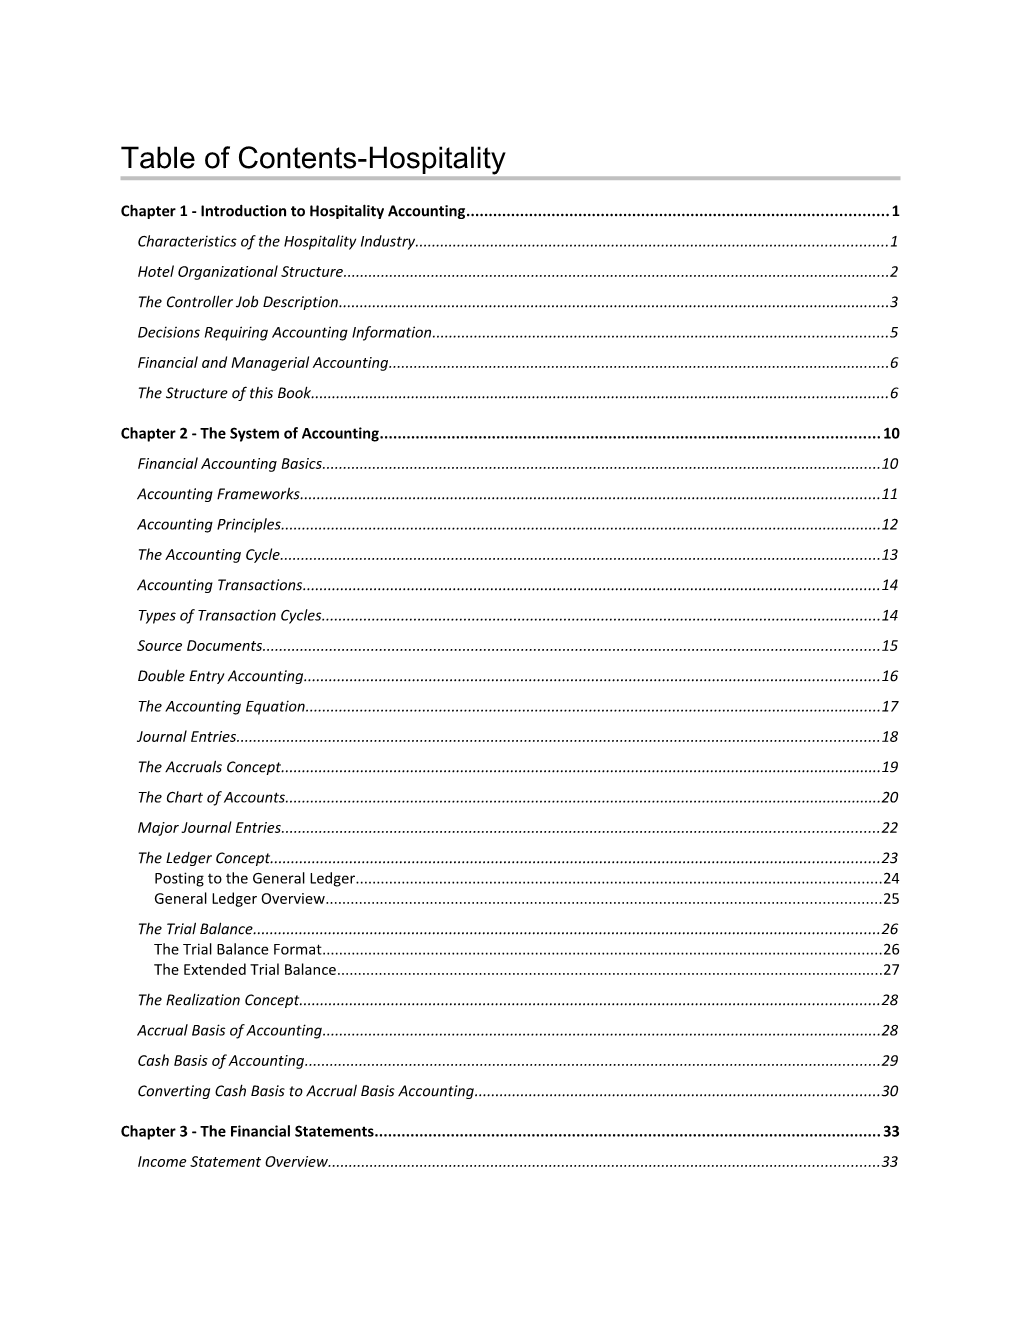 Chapter 1 - Introduction to Hospitality Accounting